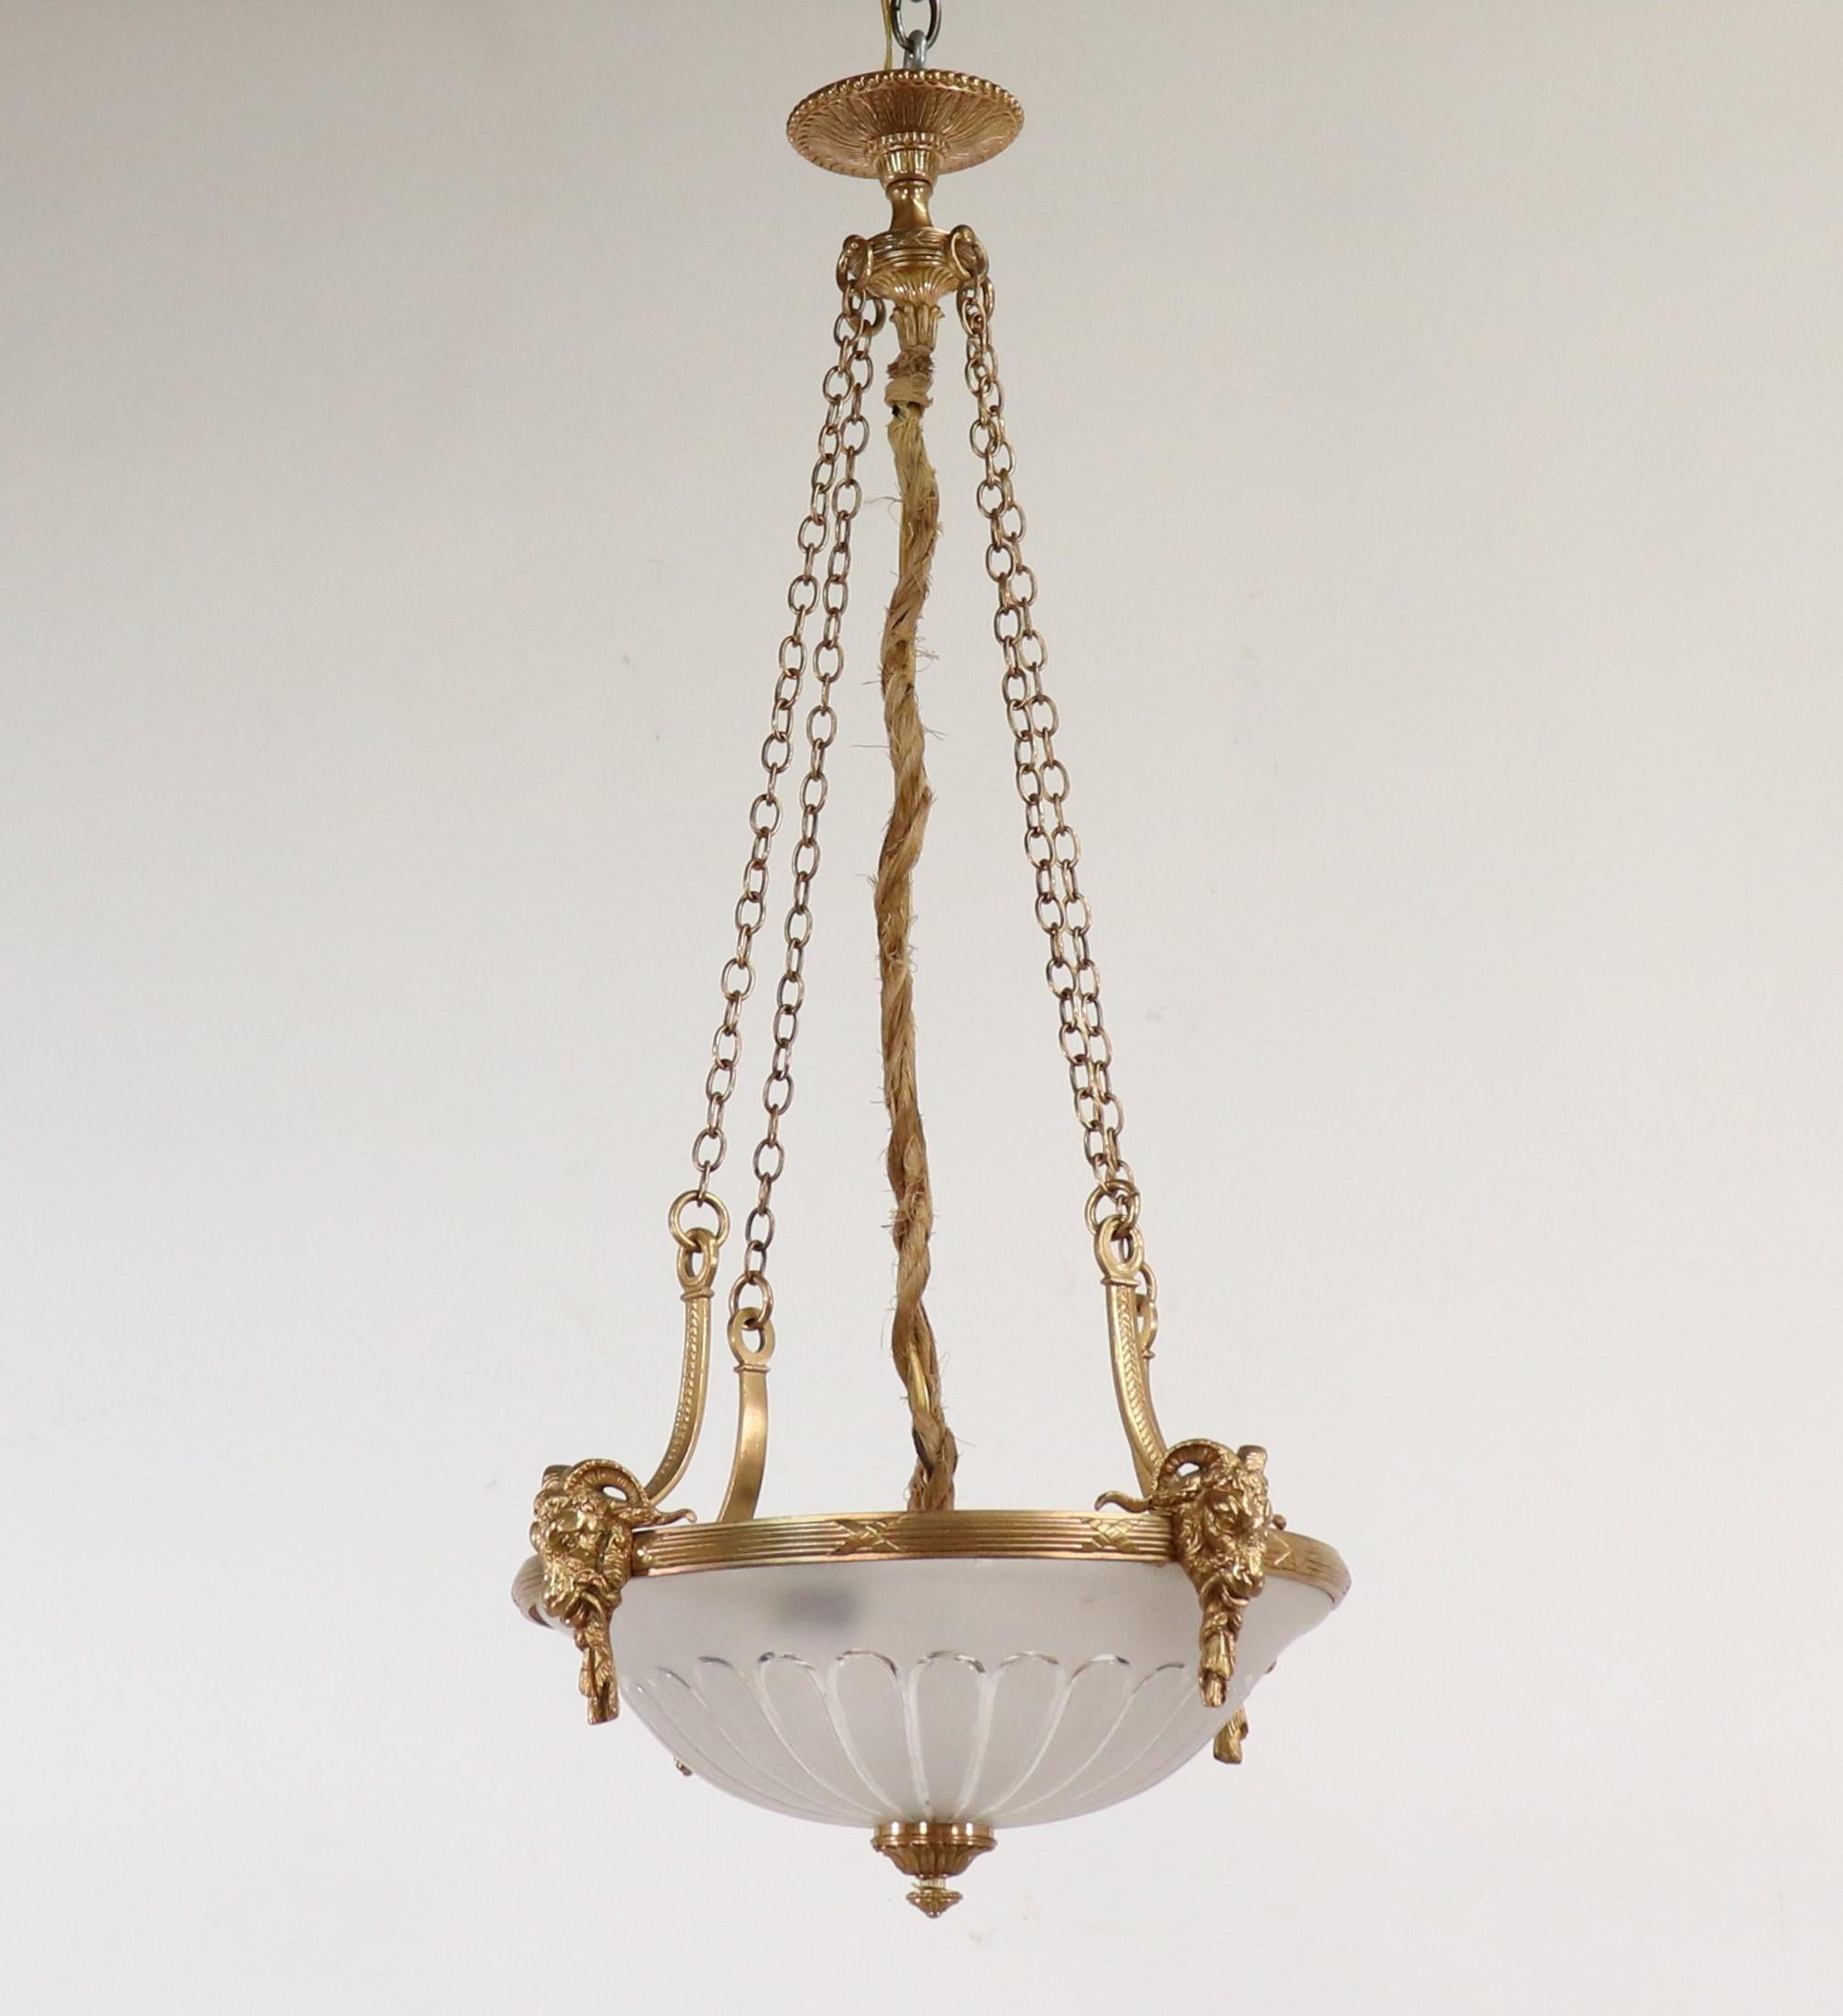 This early 20th-century pendant chandelier was made in the Neoclassical style, which originated in Europe in the early 18th Century. The Neoclassical style was characterized by its symmetry and a return to ancient Greek and Roman motifs. The